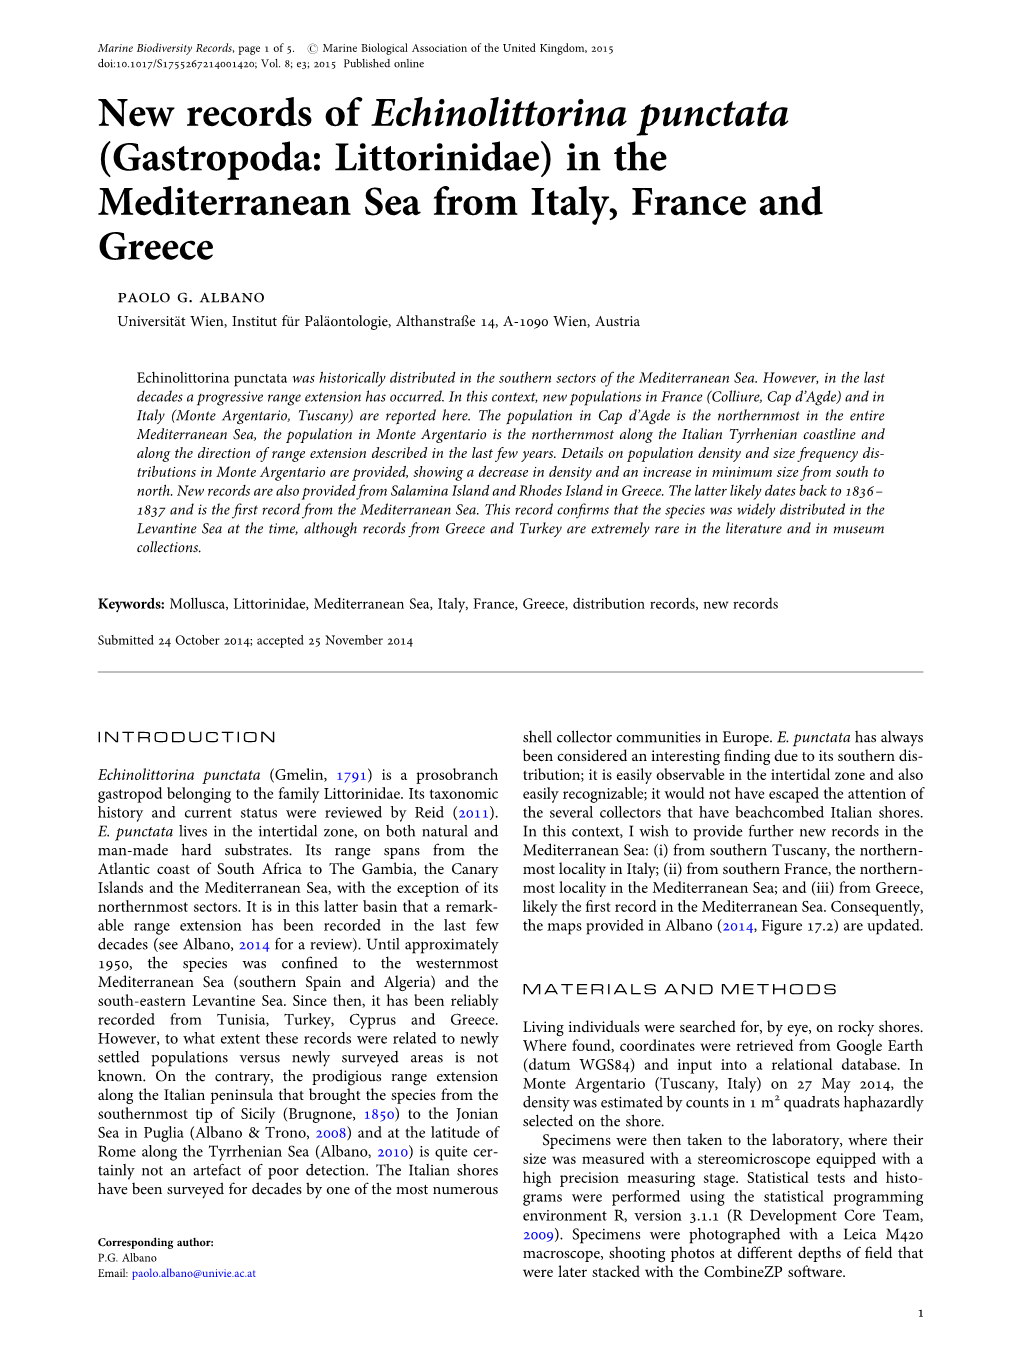 New Records of Echinolittorina Punctata (Gastropoda: Littorinidae) in the Mediterranean Sea from Italy, France and Greece Paolo G